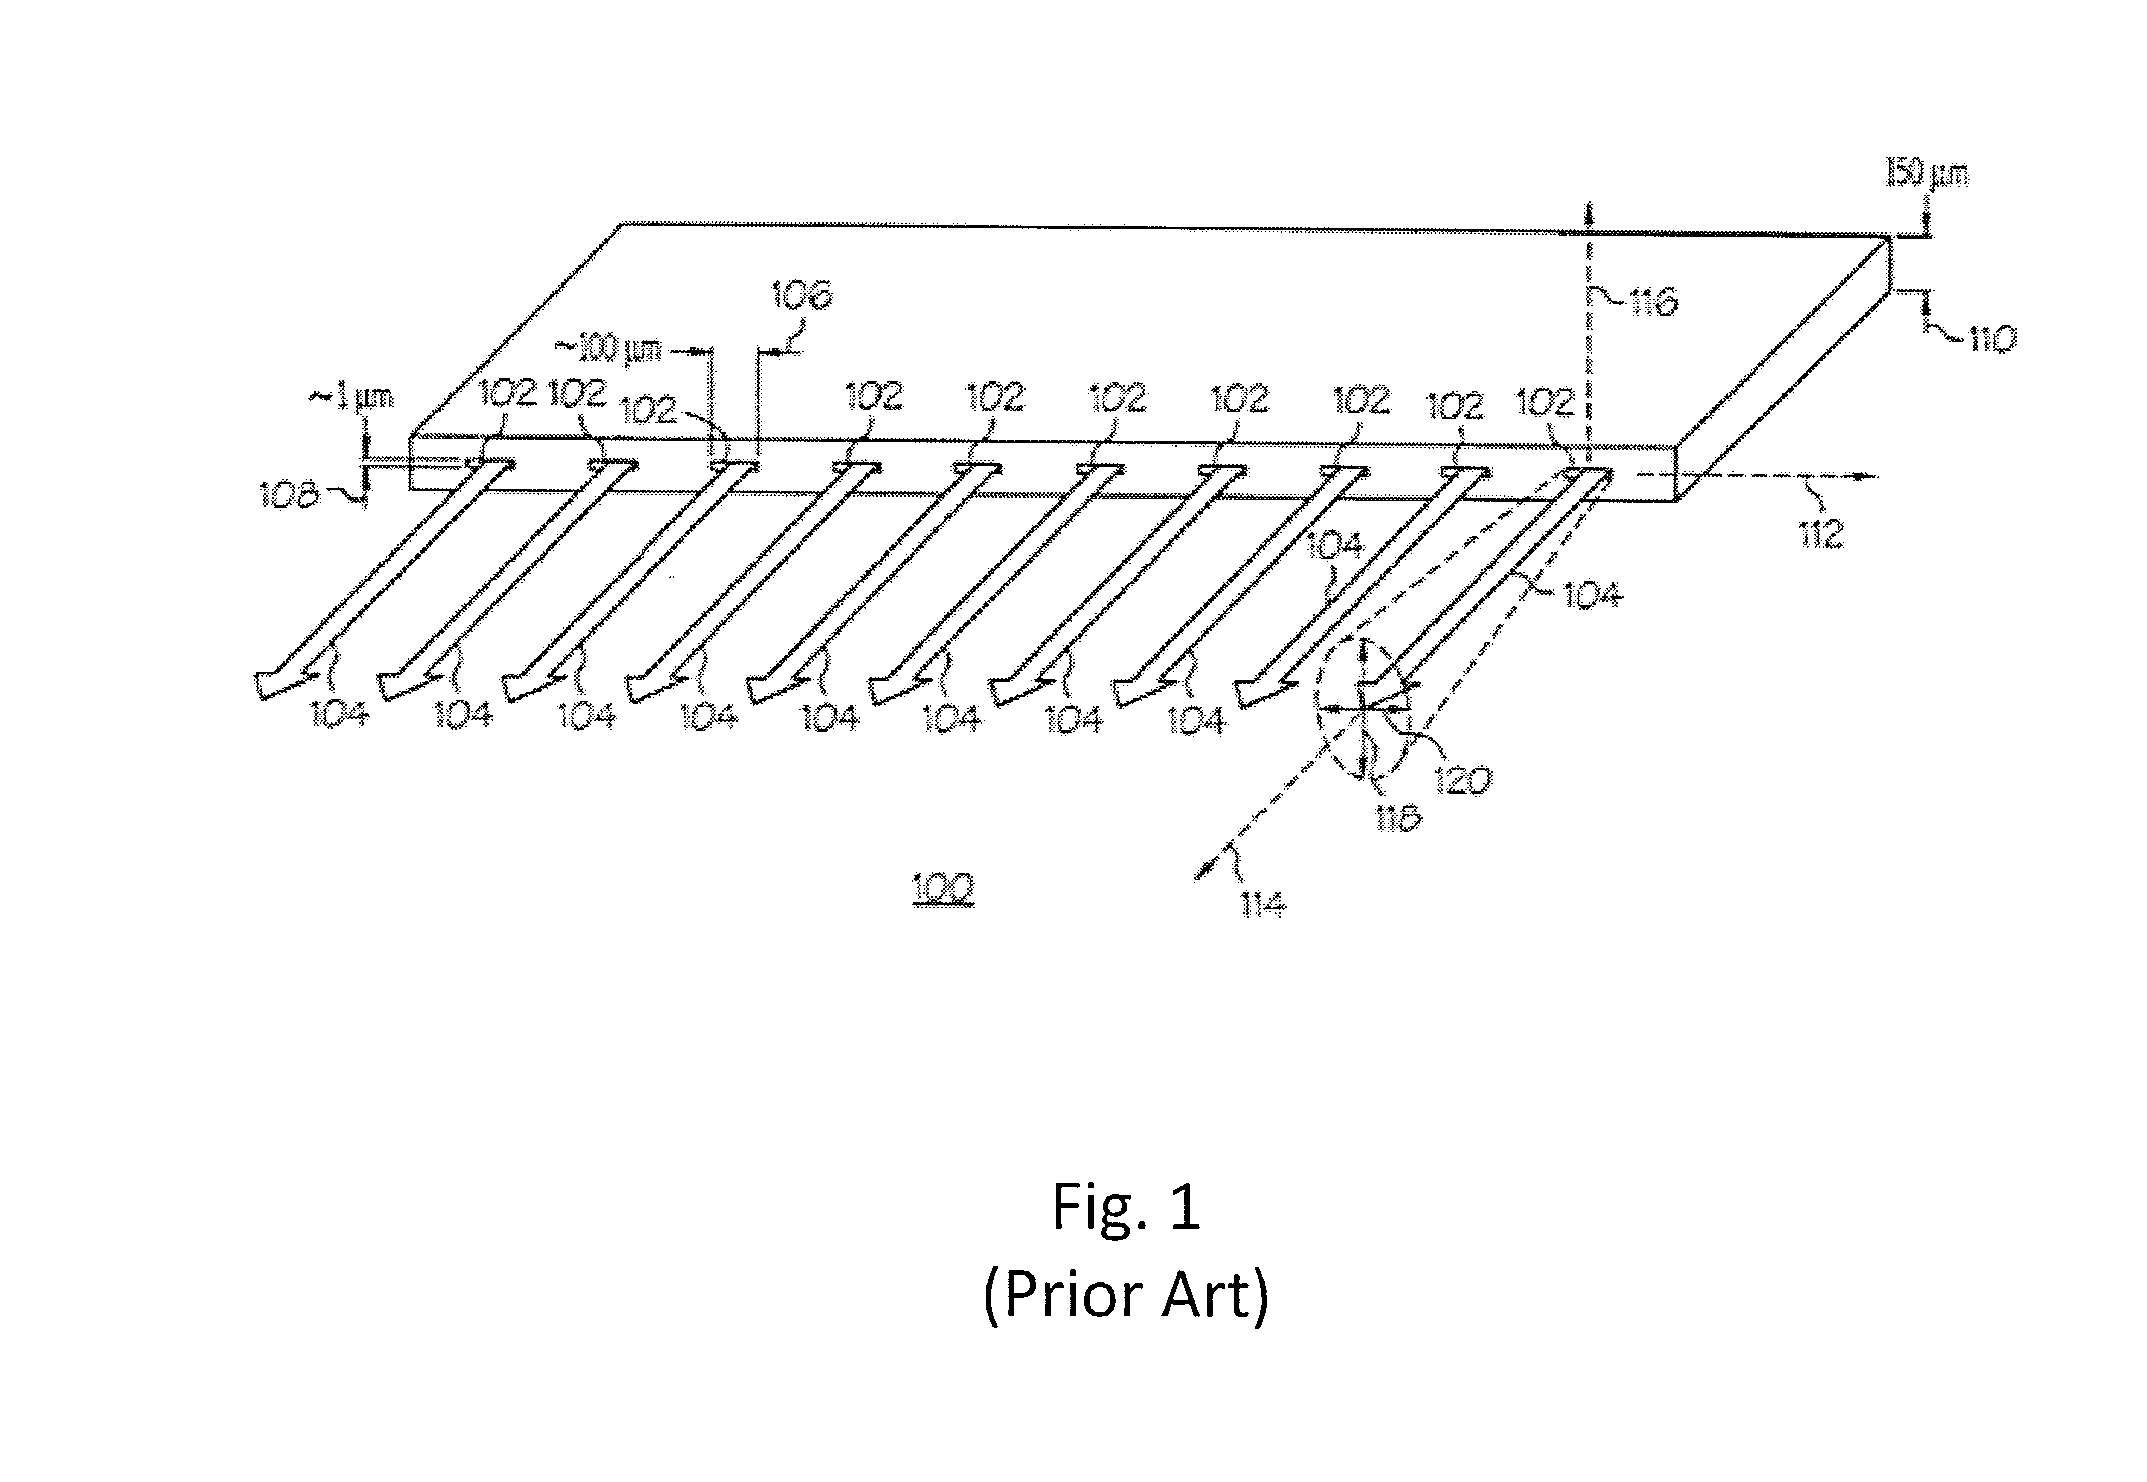 High-brightness spatial-multiplexed multi-emitter pump with tilted collimated beam